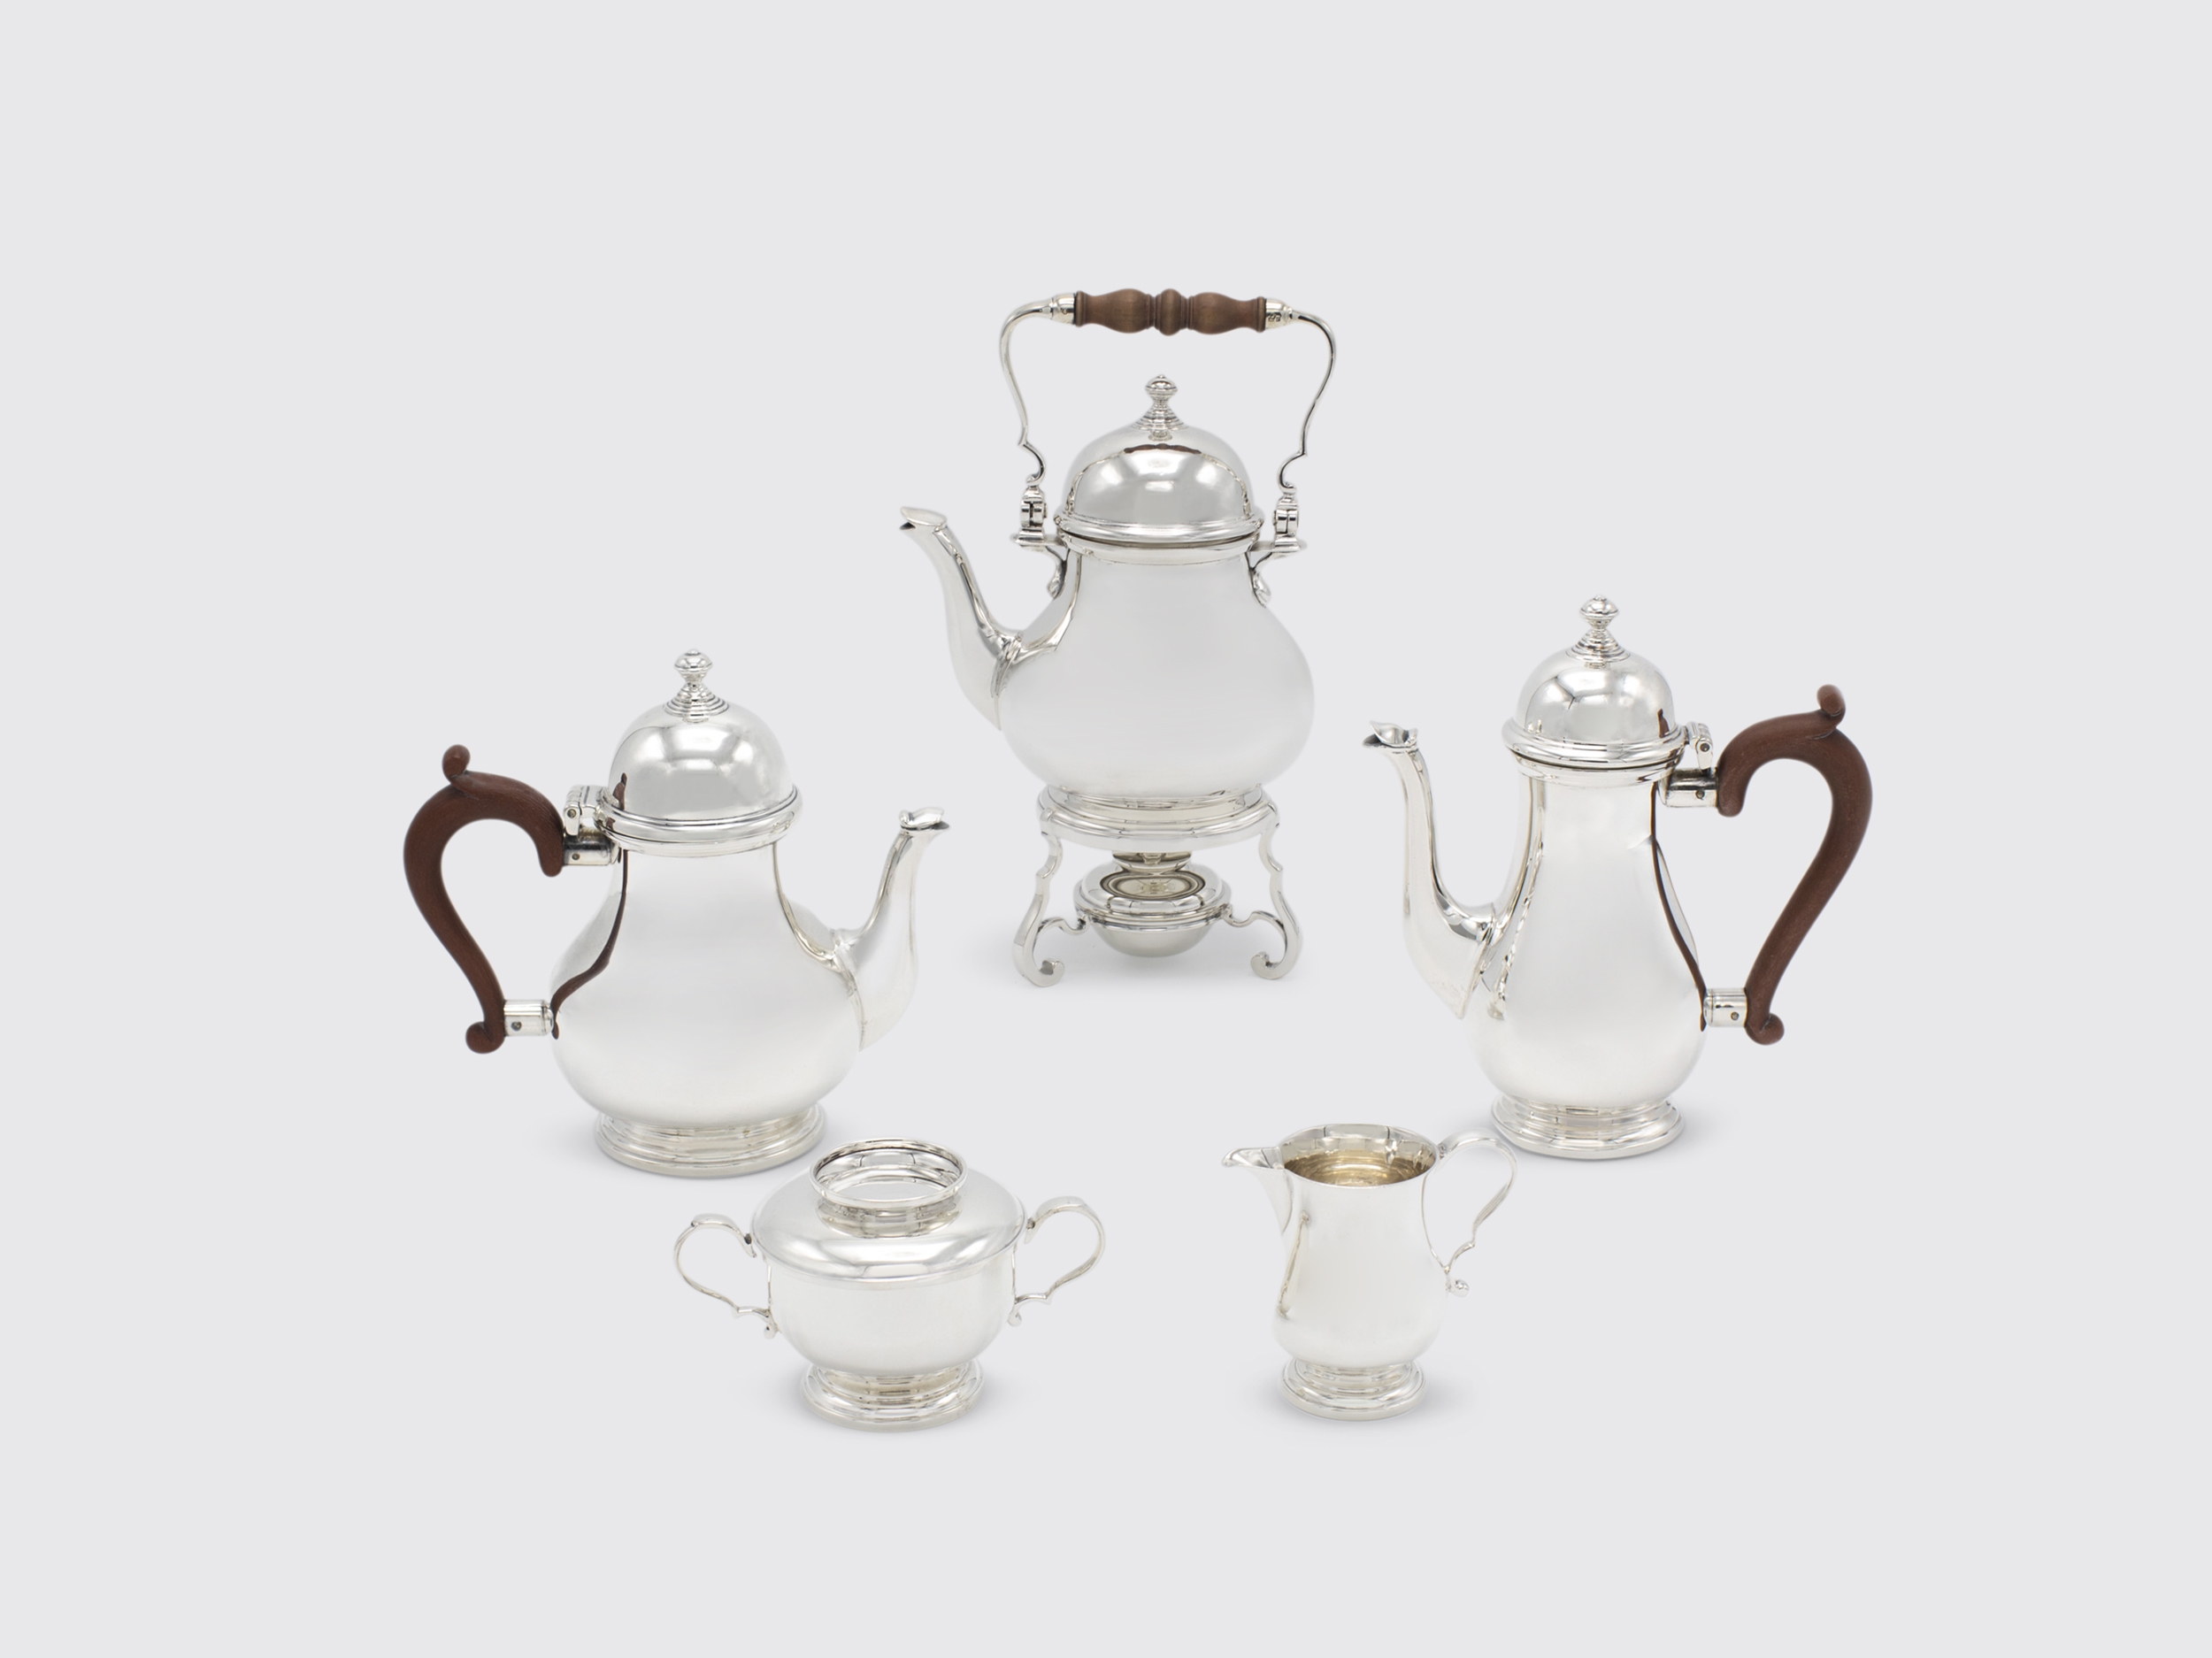 https://wylerantiques.com/wp-content/uploads/2023/04/wyler-antiques-English-silver-miniature-tea-and-coffee-set.jpg